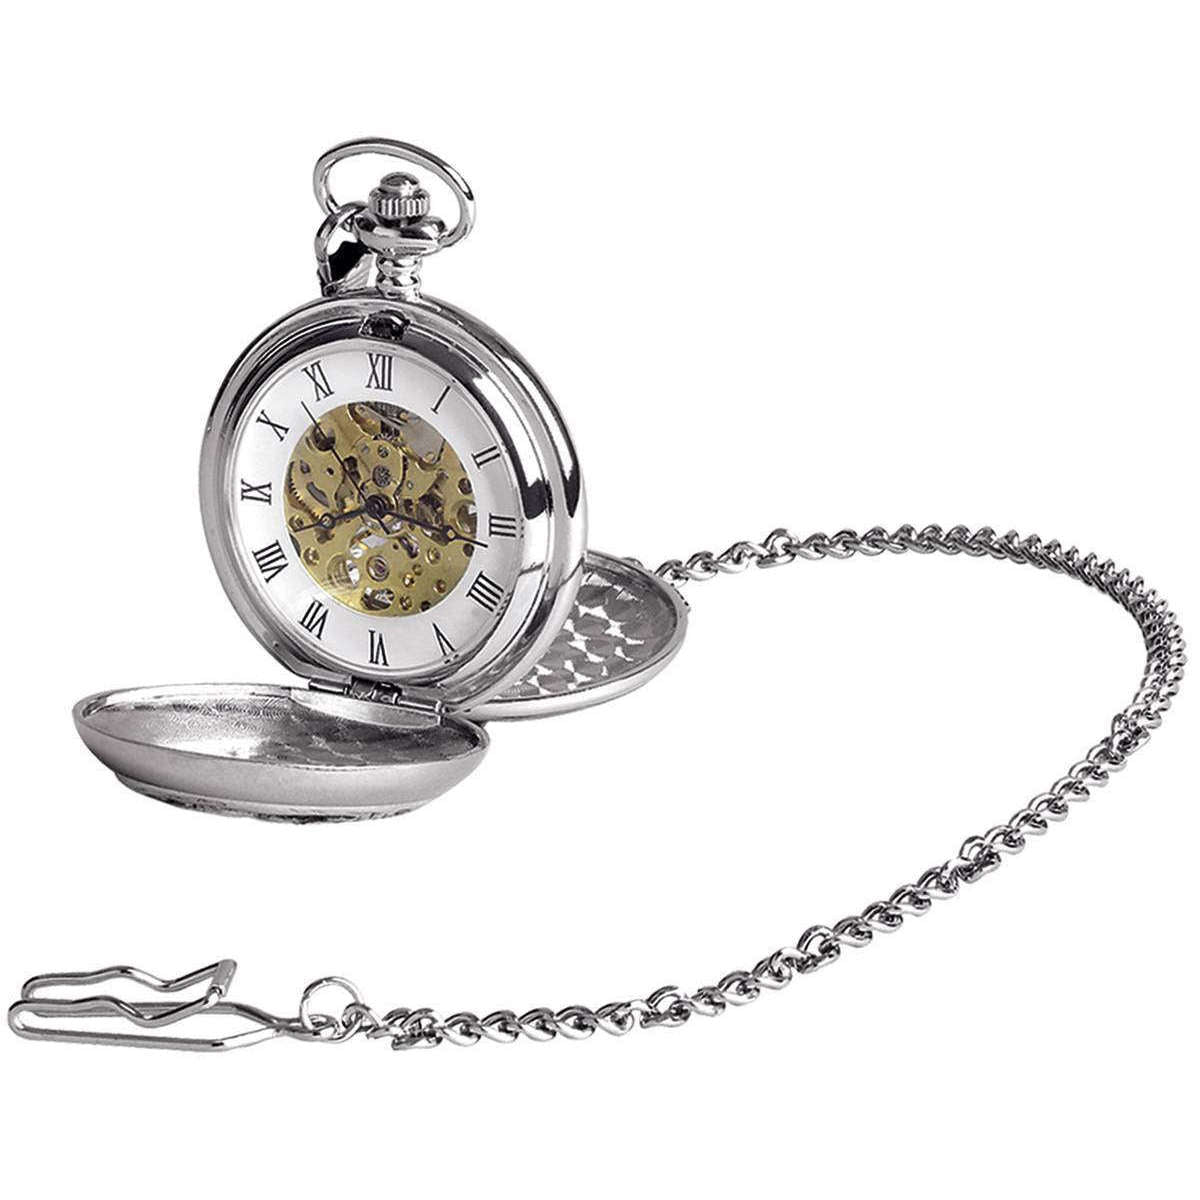 Woodford Sailing Chrome Plated Double Full Hunter Skeleton Pocket Watch - Silver